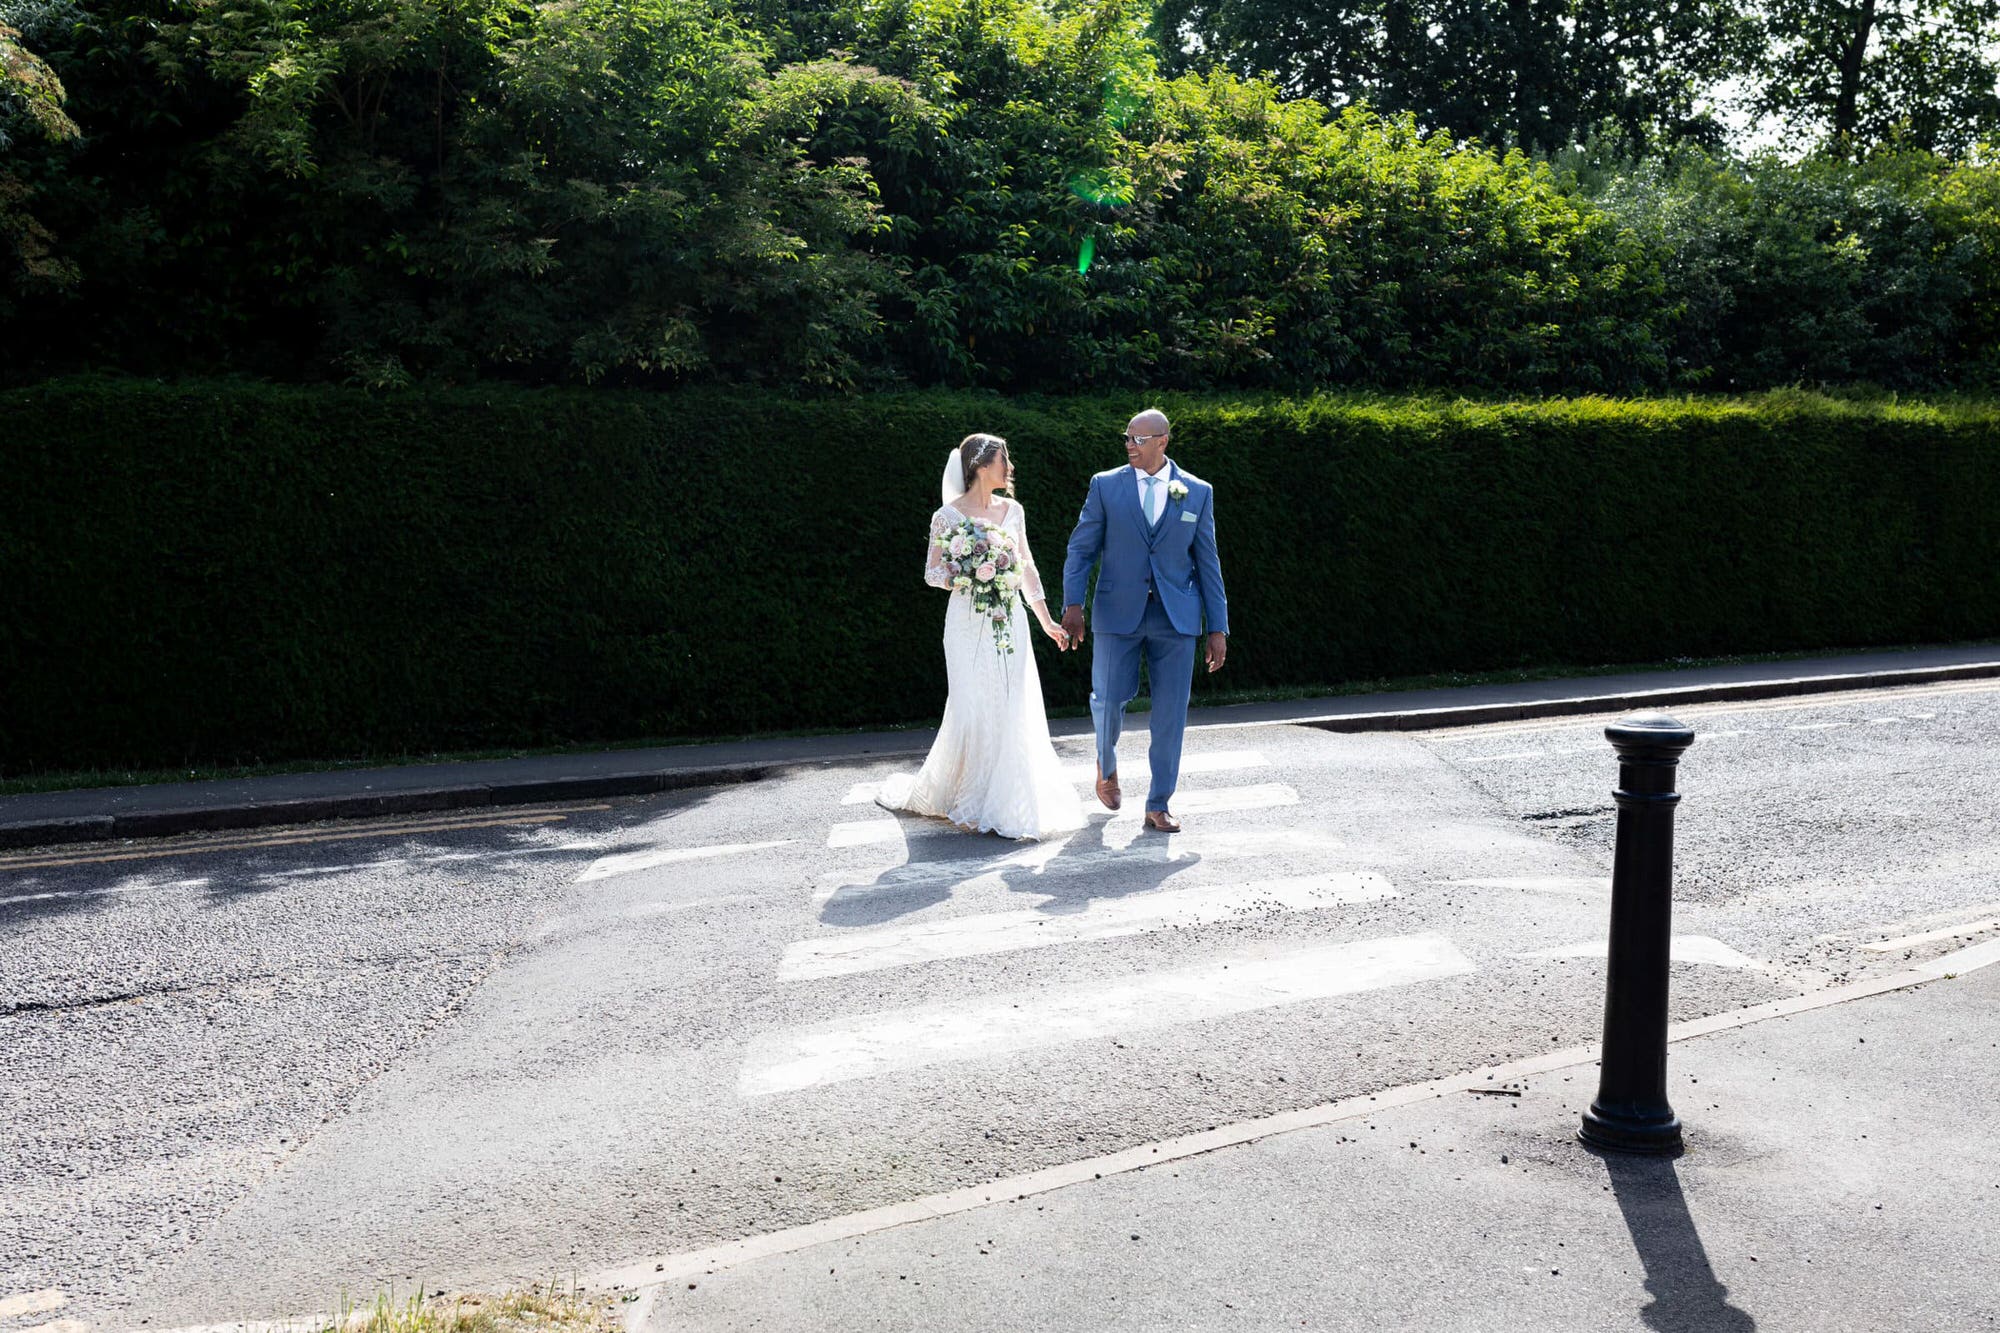 Bride and groom holding hands crossing at the zebra crossing at Danson House Bexleyheath wedding